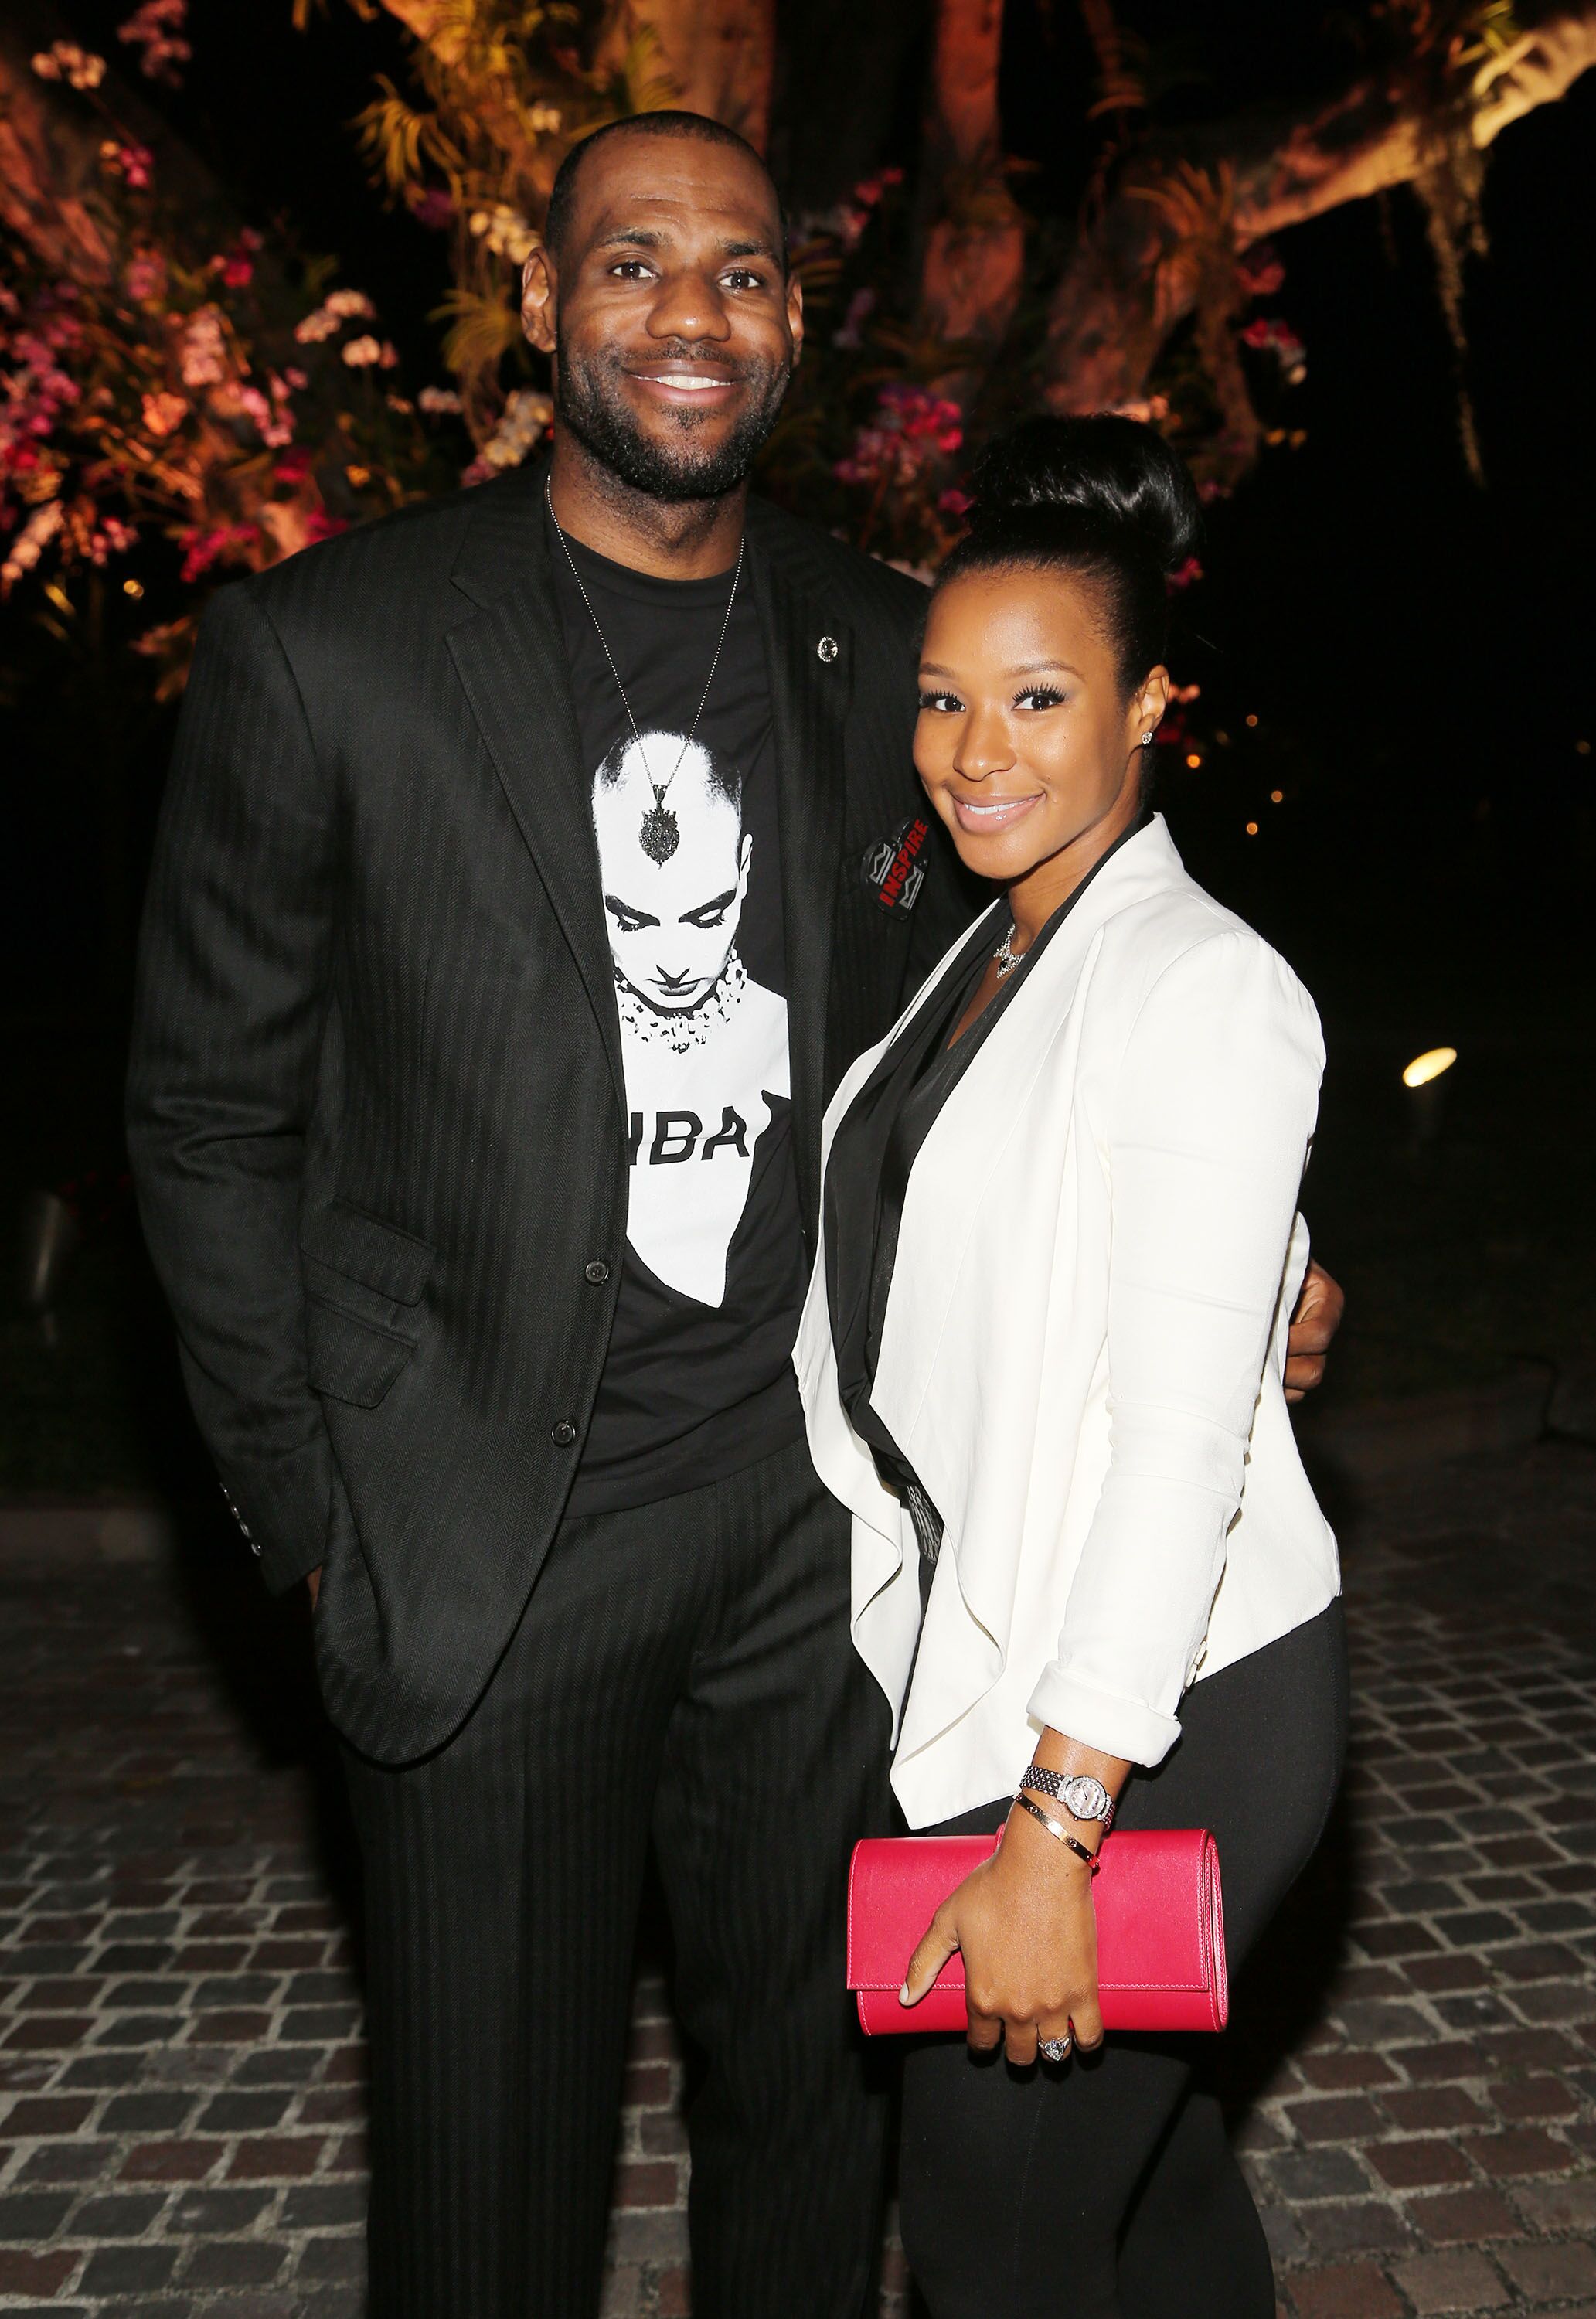 LeBron and Savannah James attend a formal event together | Source: Getty Images/GlobalImagesUkraine